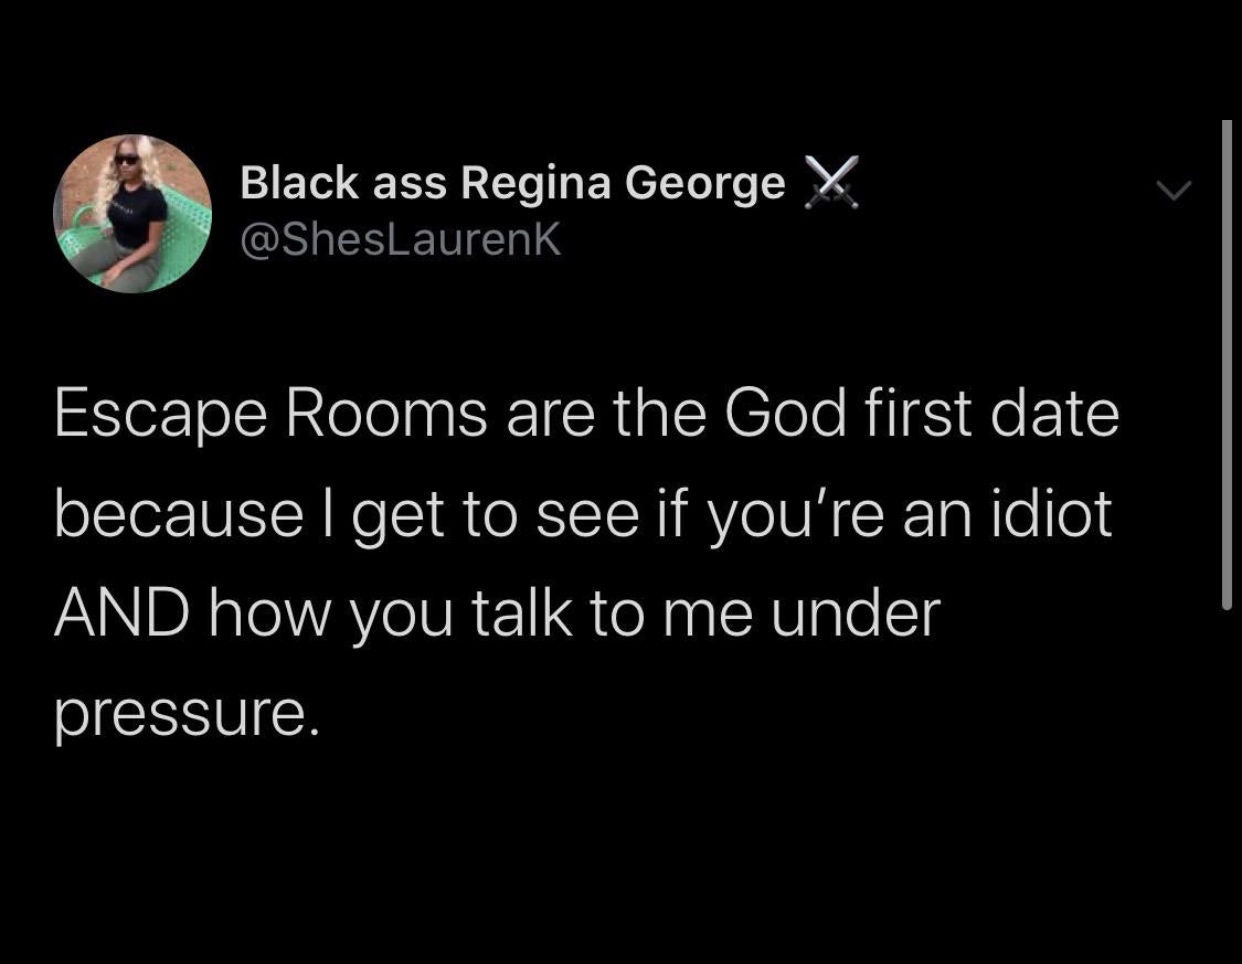 wholesome babe memes - Black ass Regina George x Escape Rooms are the God first date because I get to see if you're an idiot And how you talk to me under pressure.